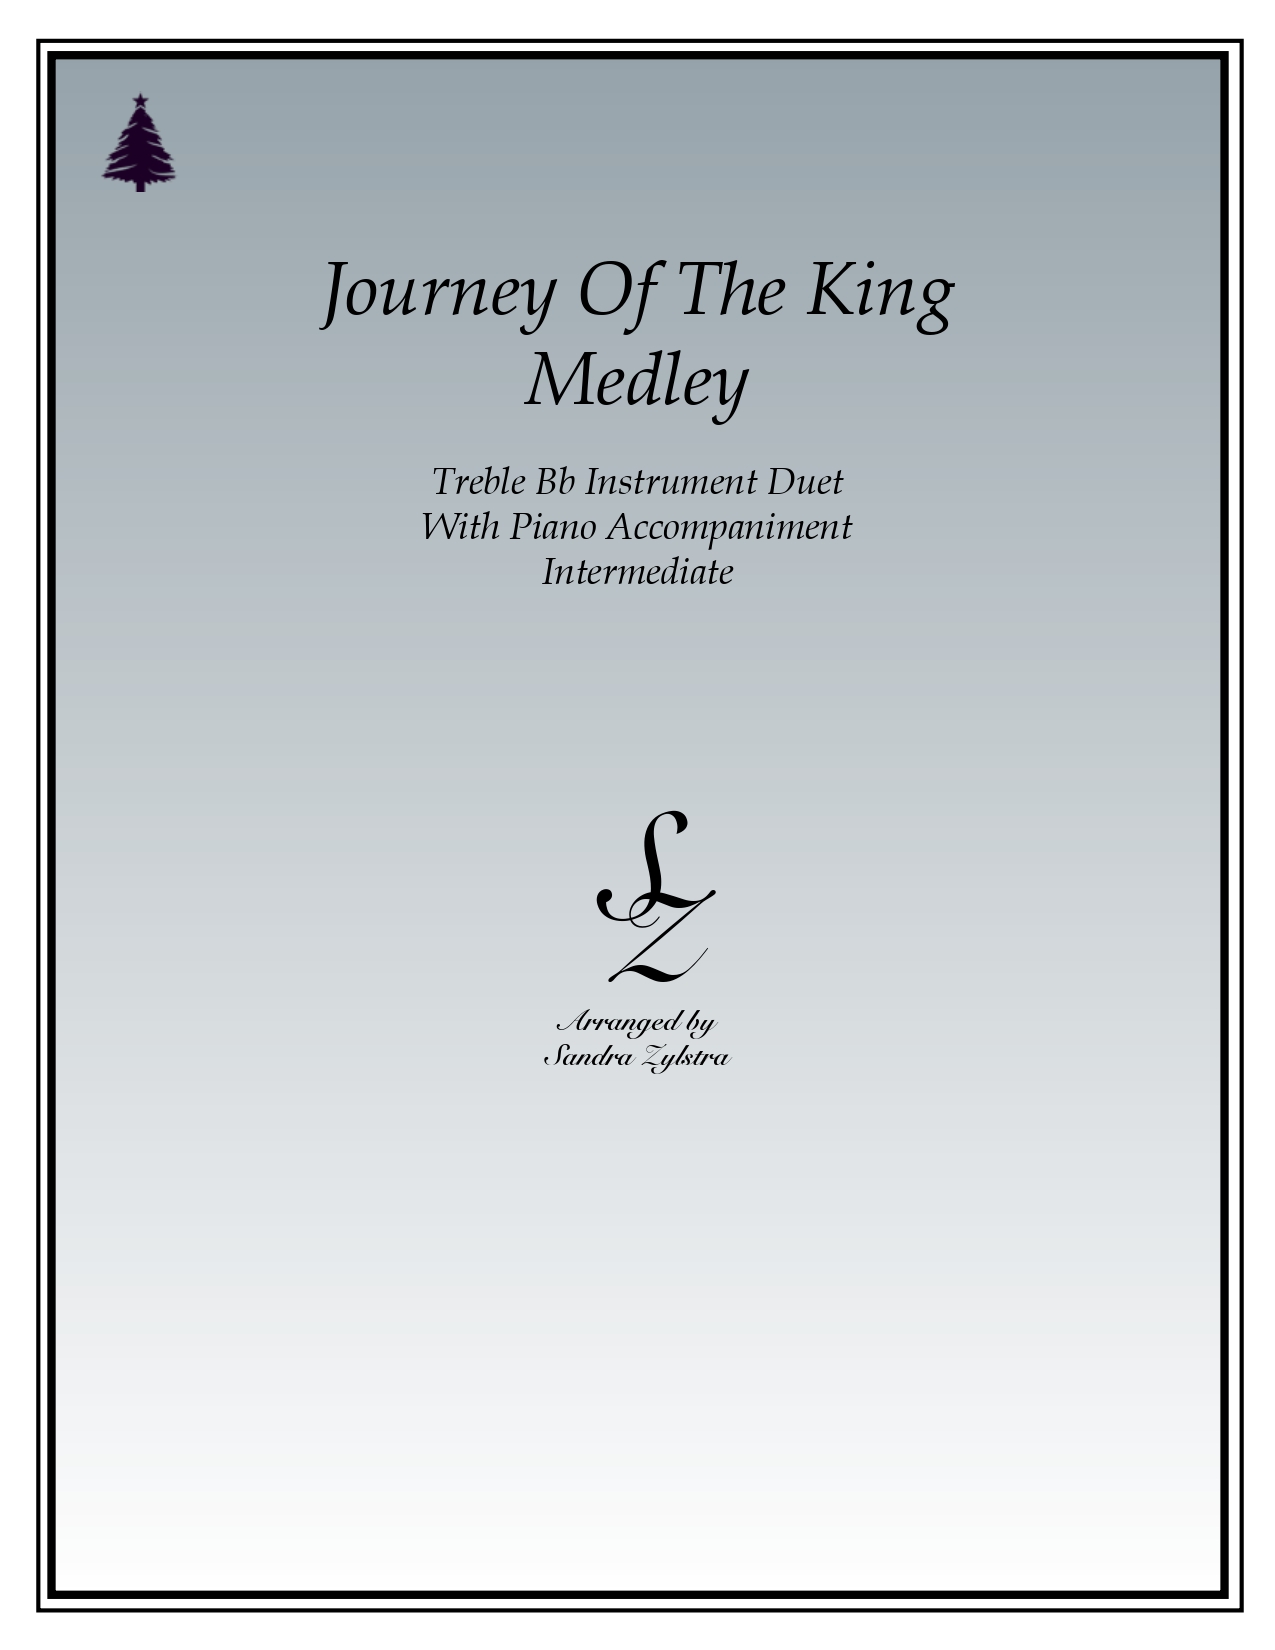 Journey Of The King Medley Bb instrument duet parts cover page 00011